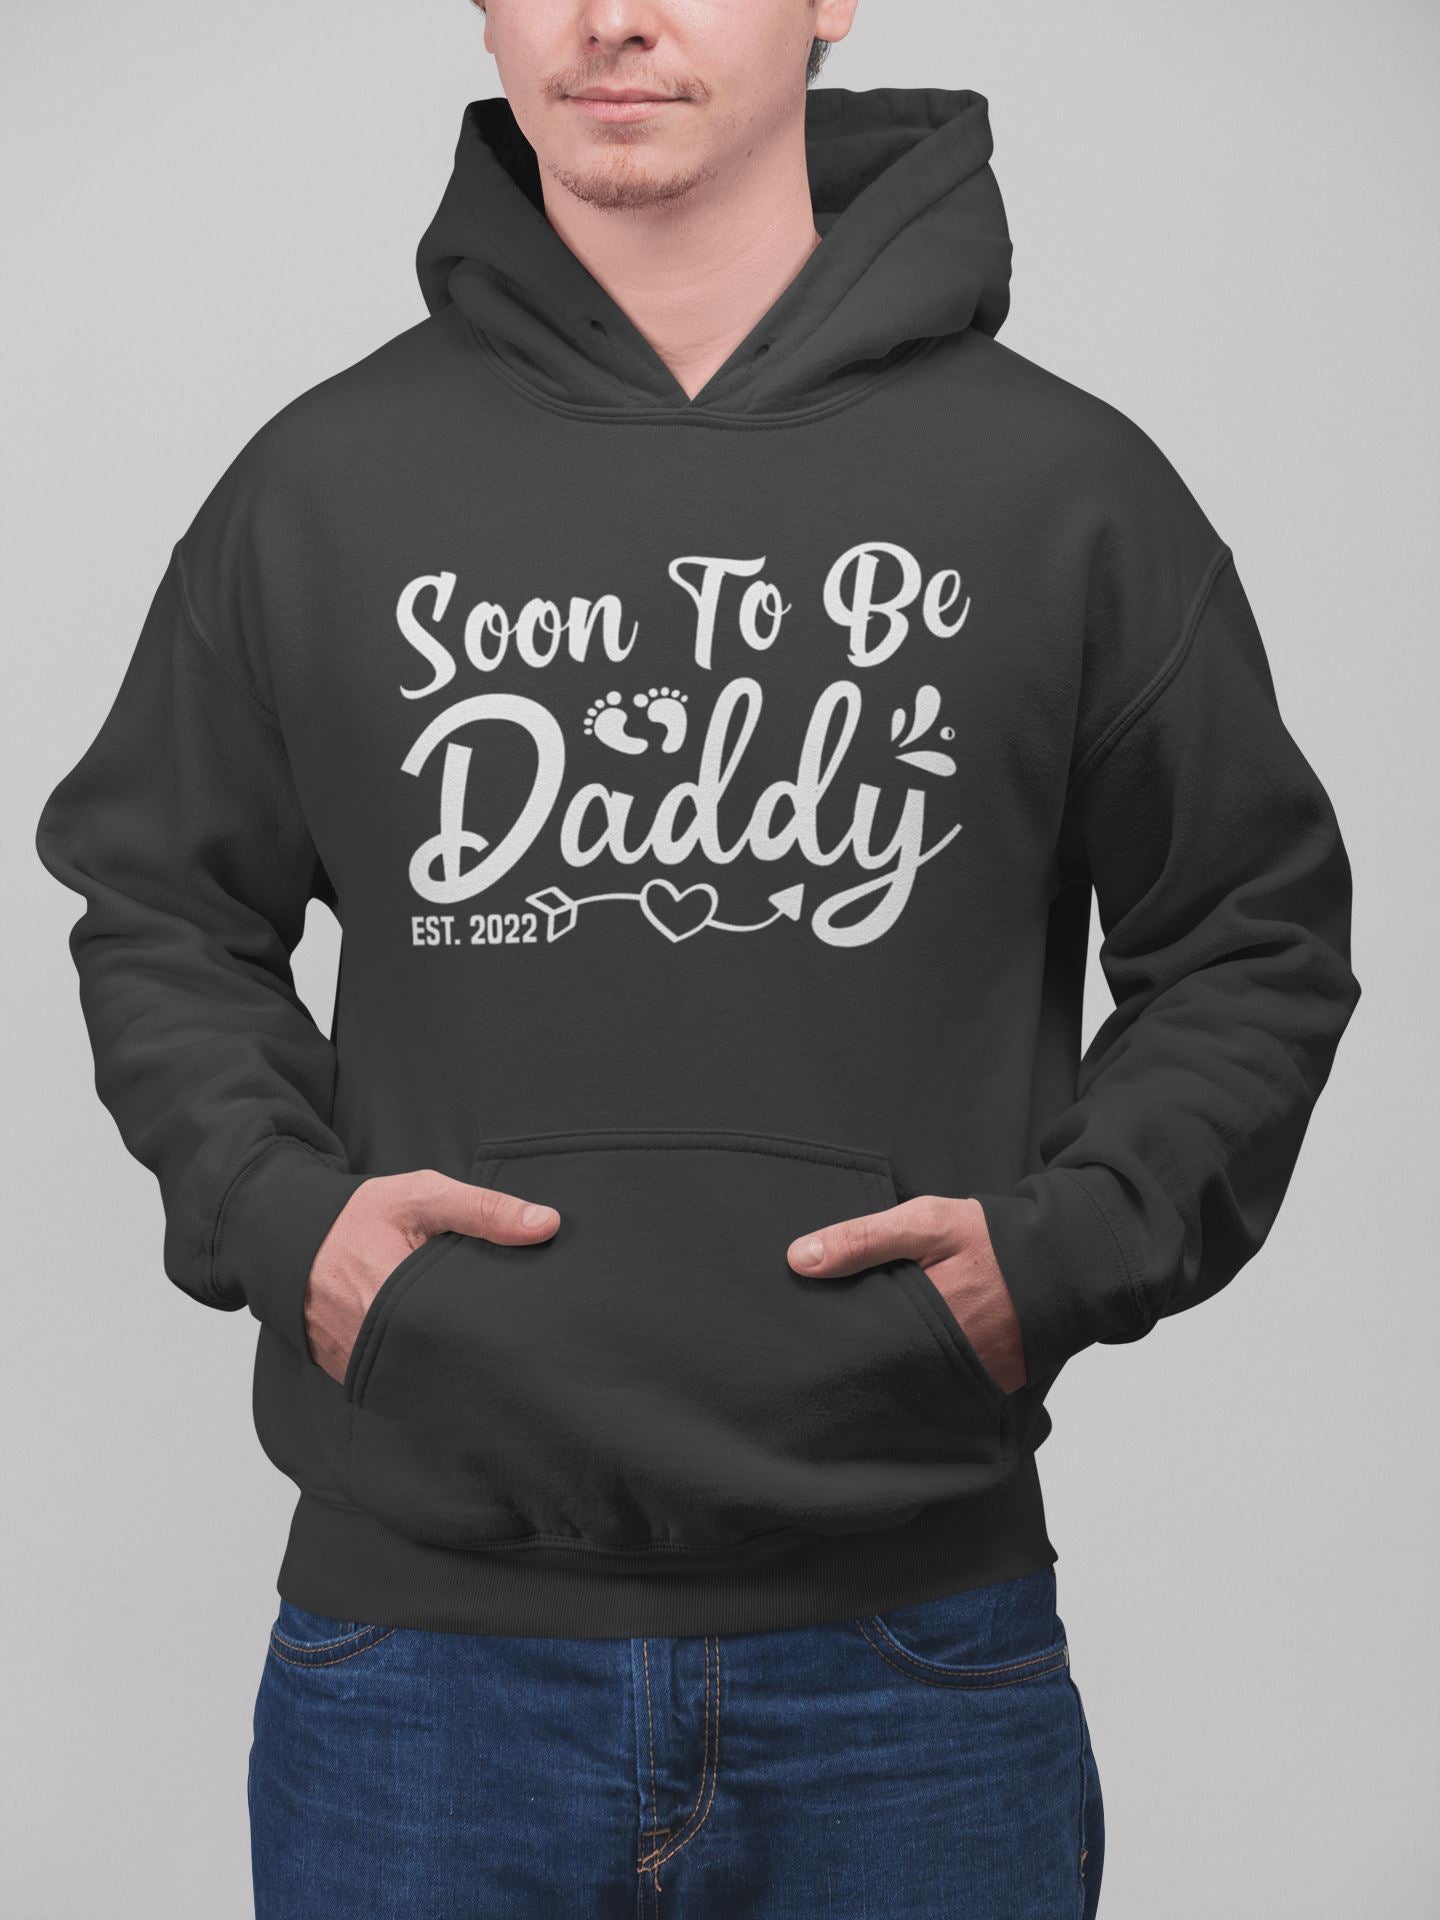 Soon to be Daddy Est. 2022 Exclusive Black Hoodie for Men Printrove 